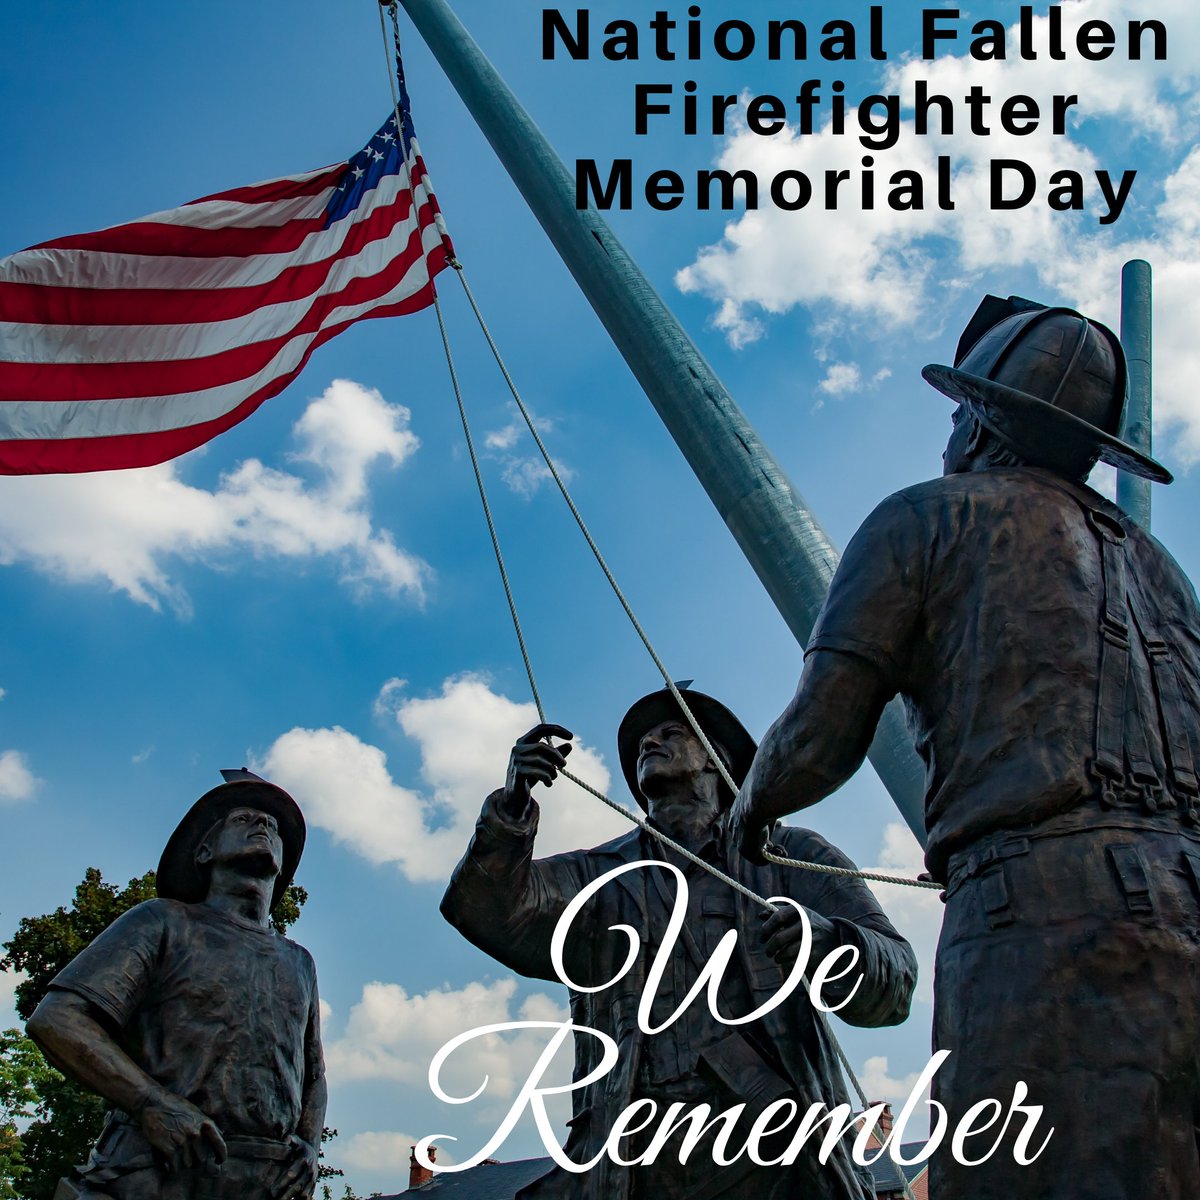 Today we remember and honor the lives of the 82 firefighters who died in the line of duty in 2019, and 21 firefighters who died in previous years. These fallen firefighters will be forever honored on the #NationalFallenFirefighterMemorial in Emmitsburg, Maryland. ❤⚫❤

 1/2